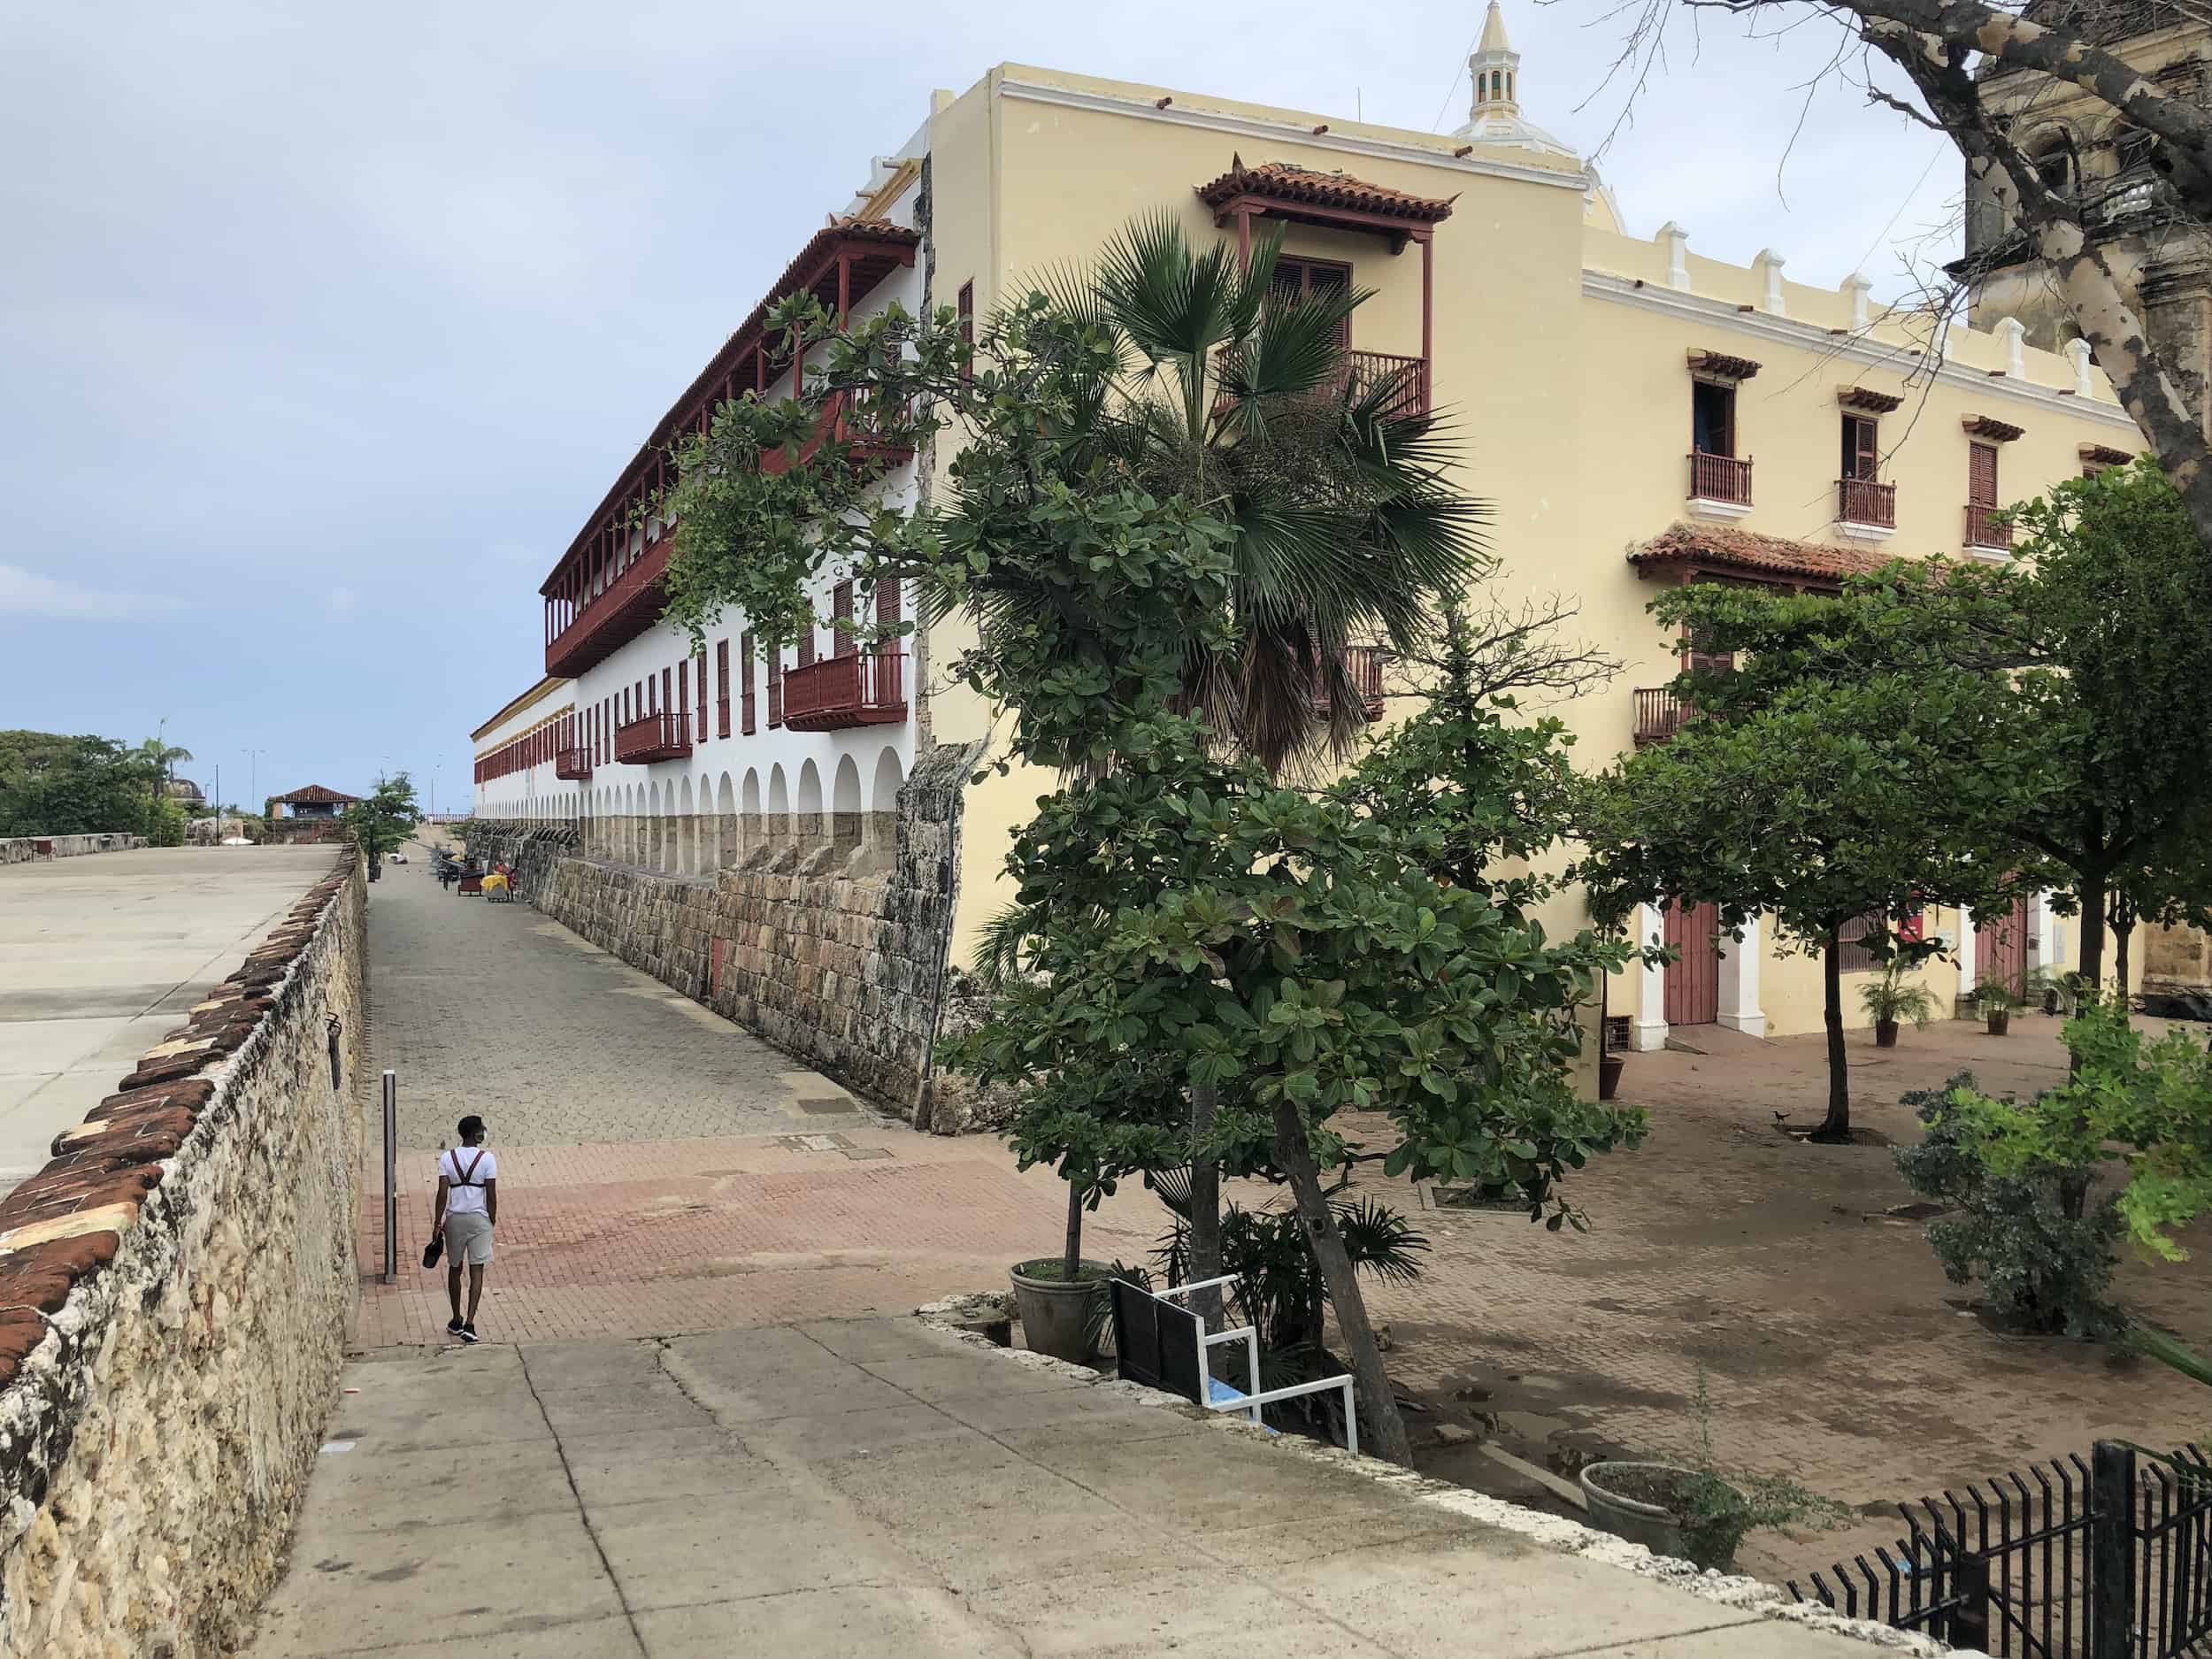 Street and original wall of the Bastion of Saint Ignatius on the Walls of Cartagena, Colombia